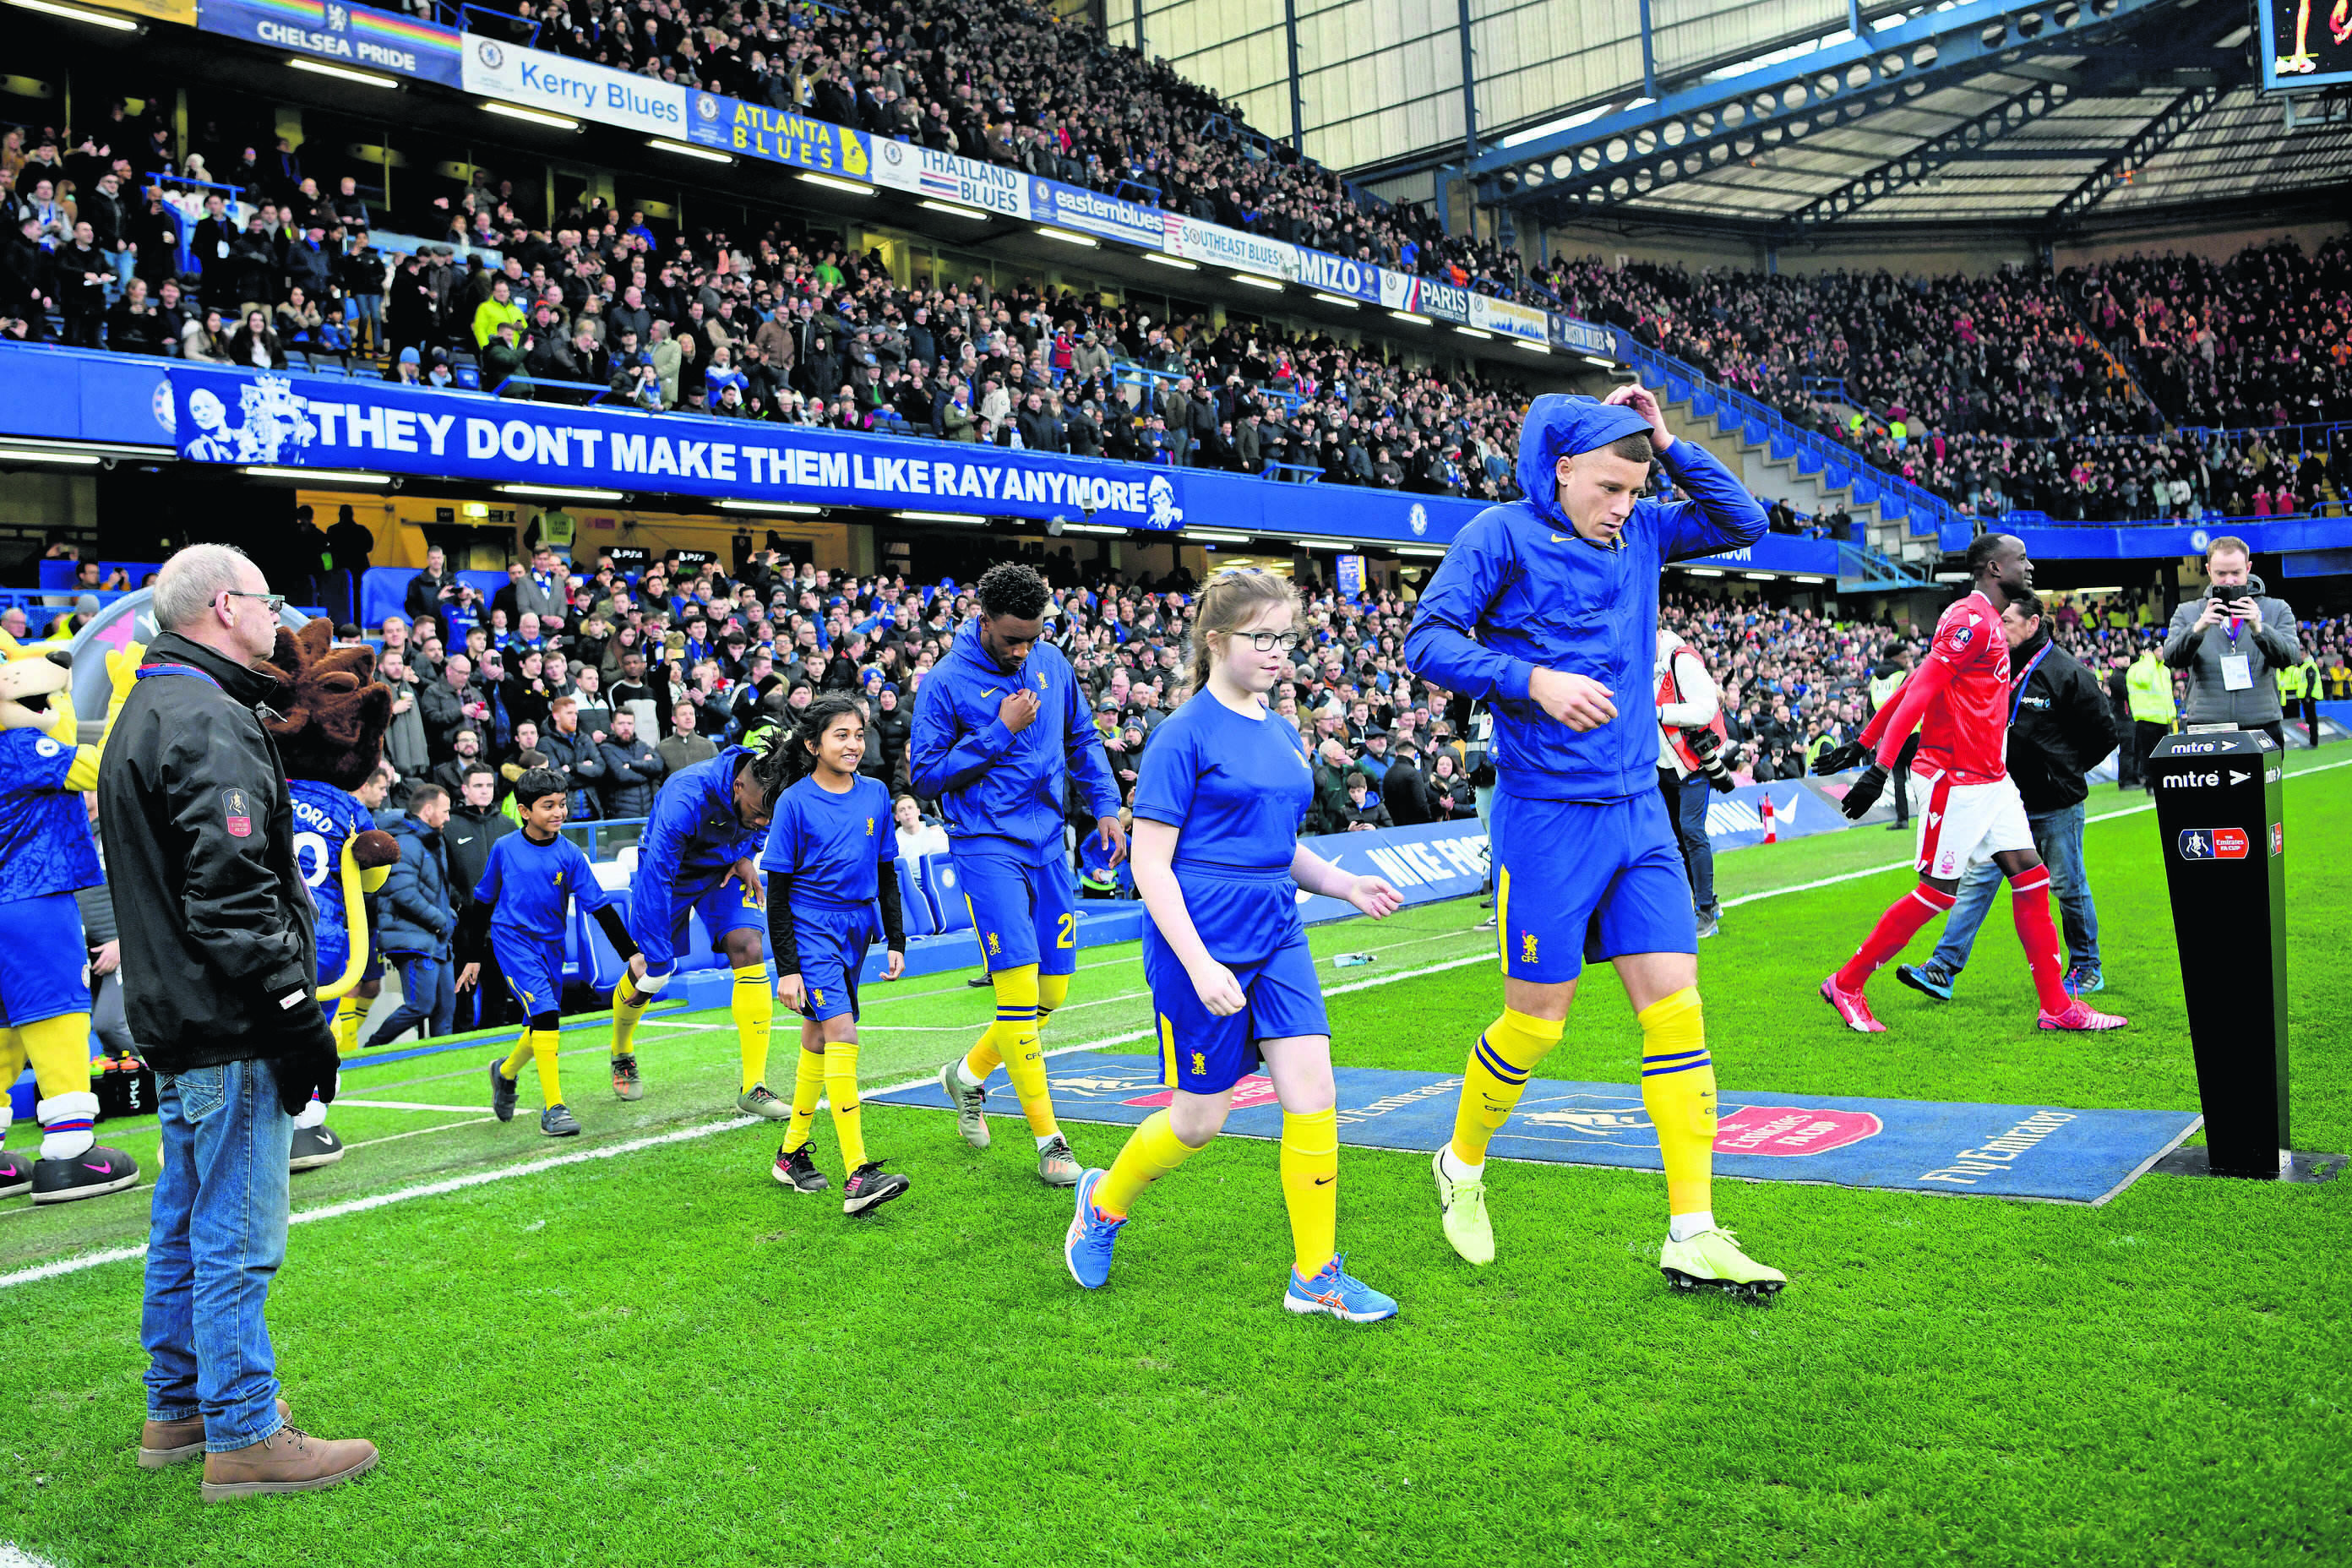 Taylor and Adam Tebay walk out at Stamford Bridge as mascots for Chelsea for the FA Cup match against Nottingham Forrest